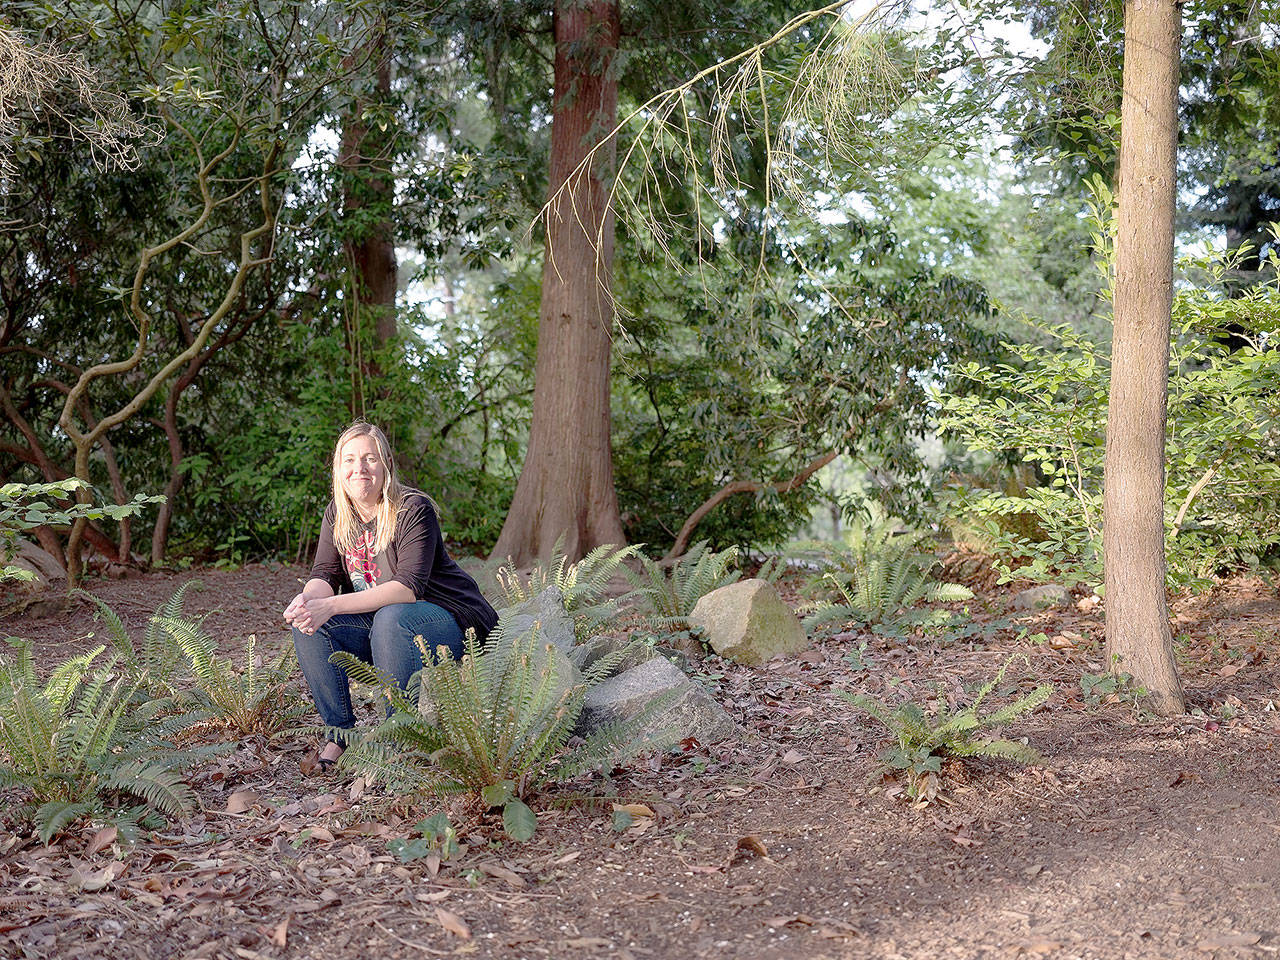 Human composting activist Nina Schoen, a Seattle media tech executive, wants her body to “turn into something that can regenerate life.” (Karen Ducey/Los Angeles Times)